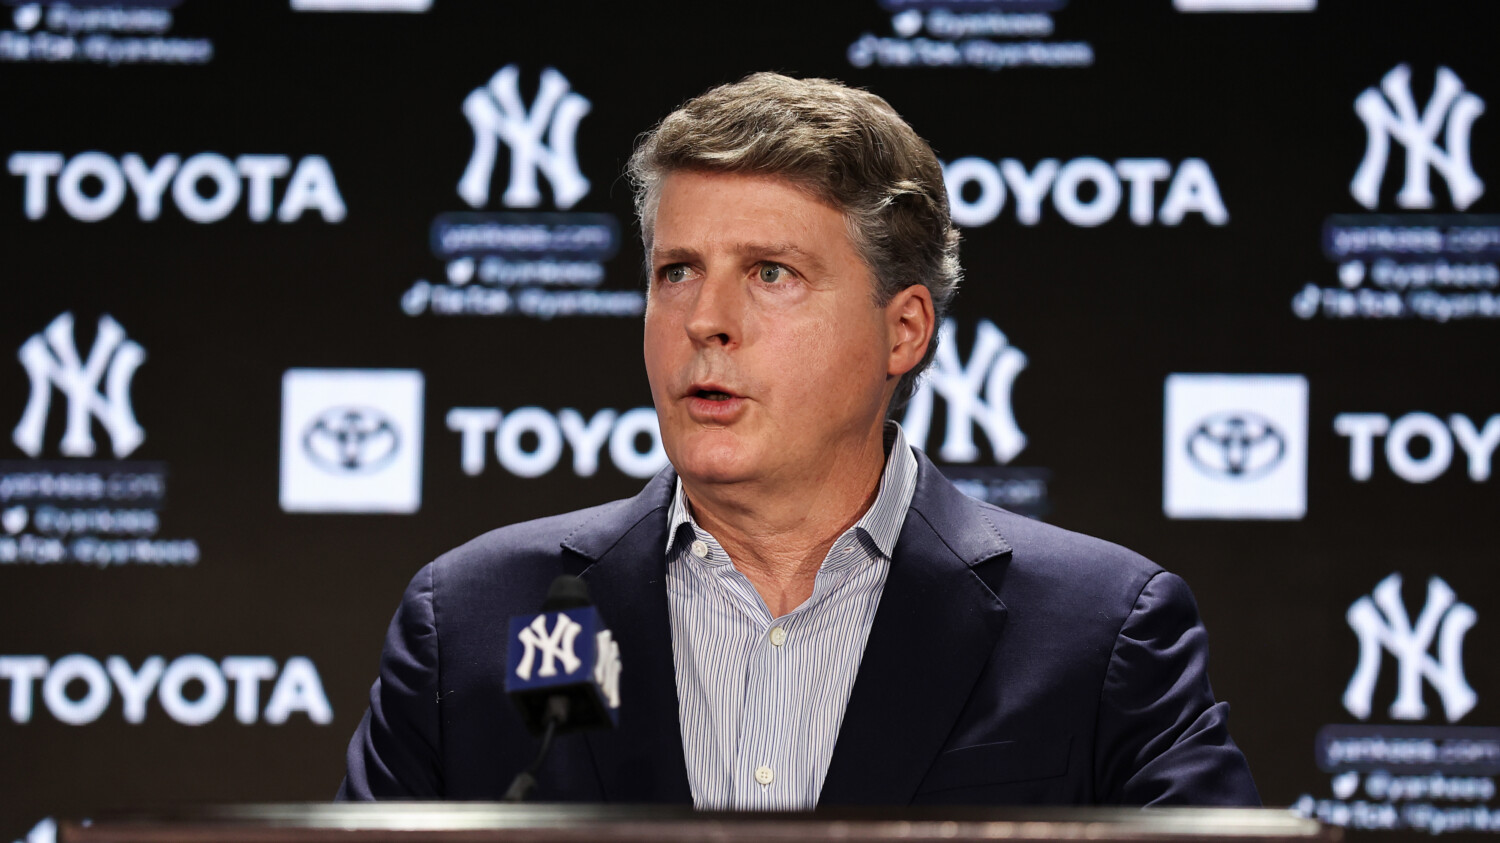 Official: AC Milan and the New York Yankees embark on 'groundbreaking  collaboration